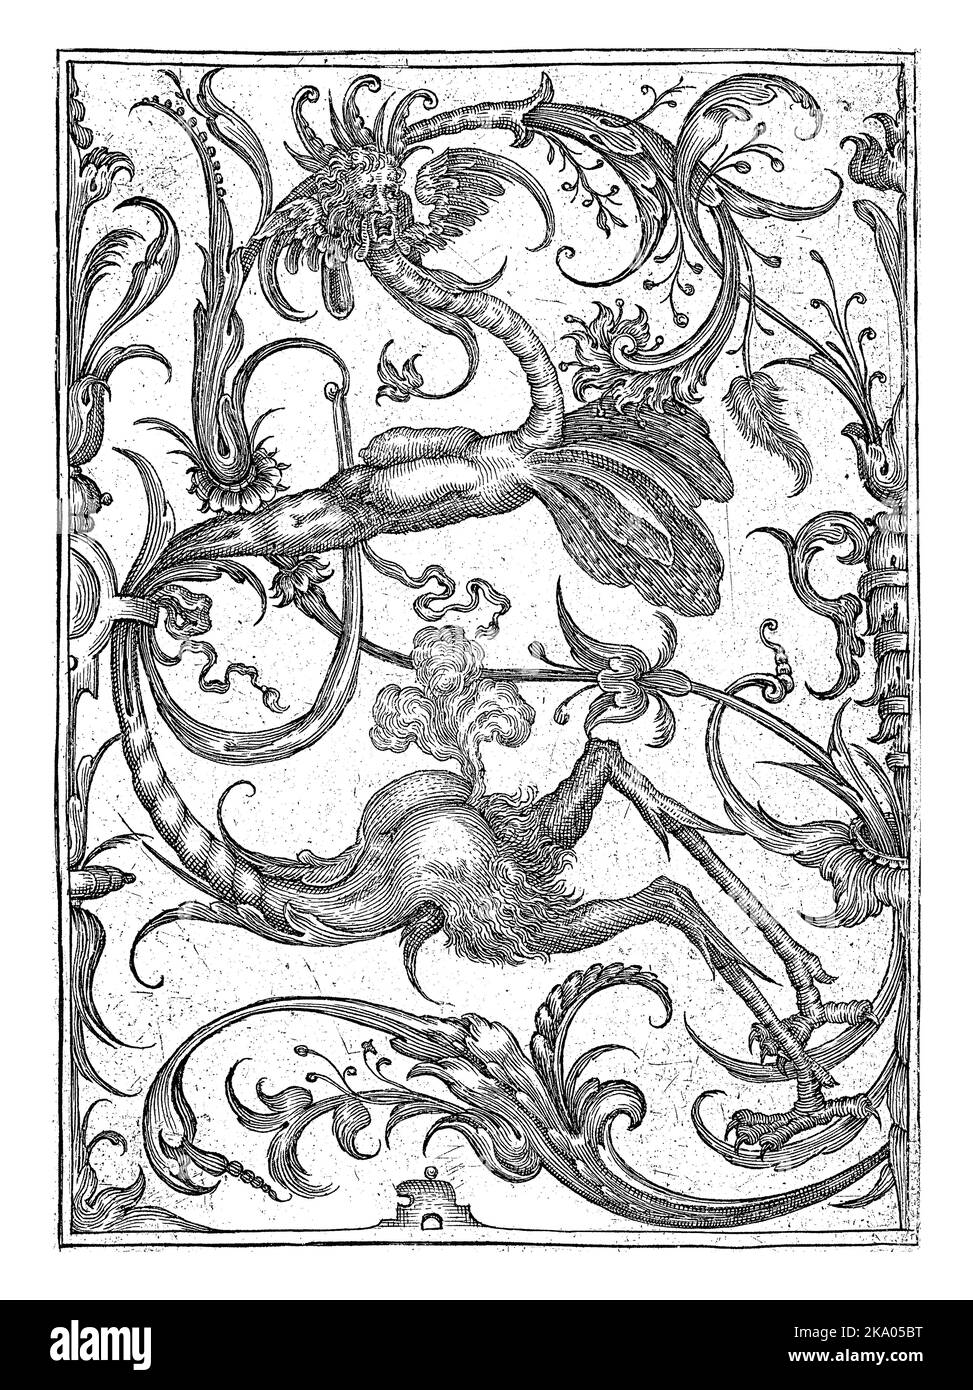 The upper and lower body of the dragon is intertwined with the leaf vines. From a series of 12 sheets with leaf vines and grotesques, dedicated to Geo Stock Photo